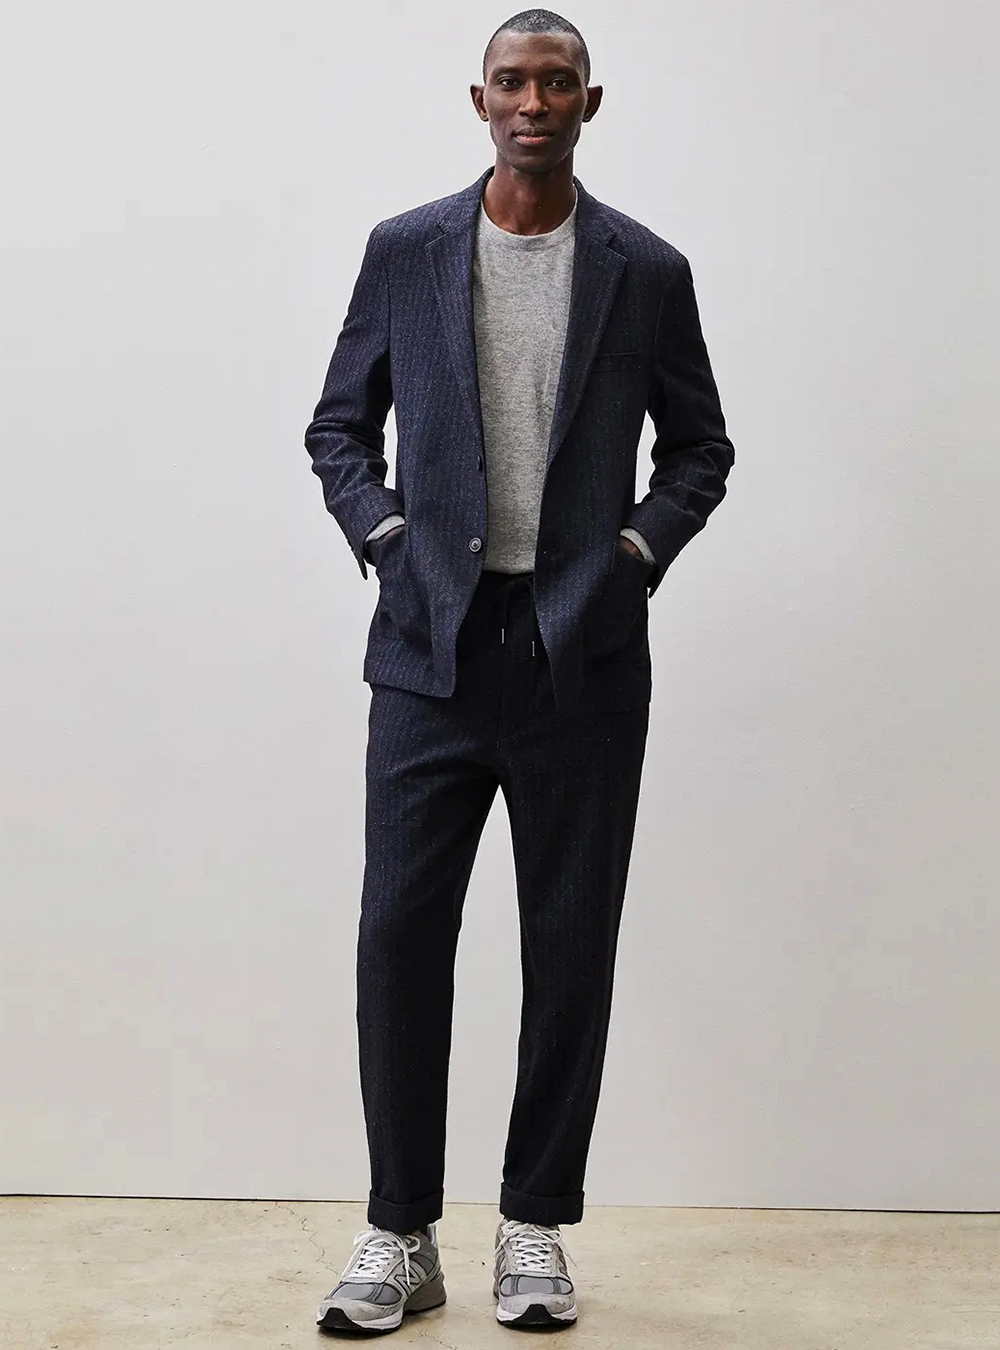 Stylish Ways to Wear a Suit with a T-Shirt - Suits Expert